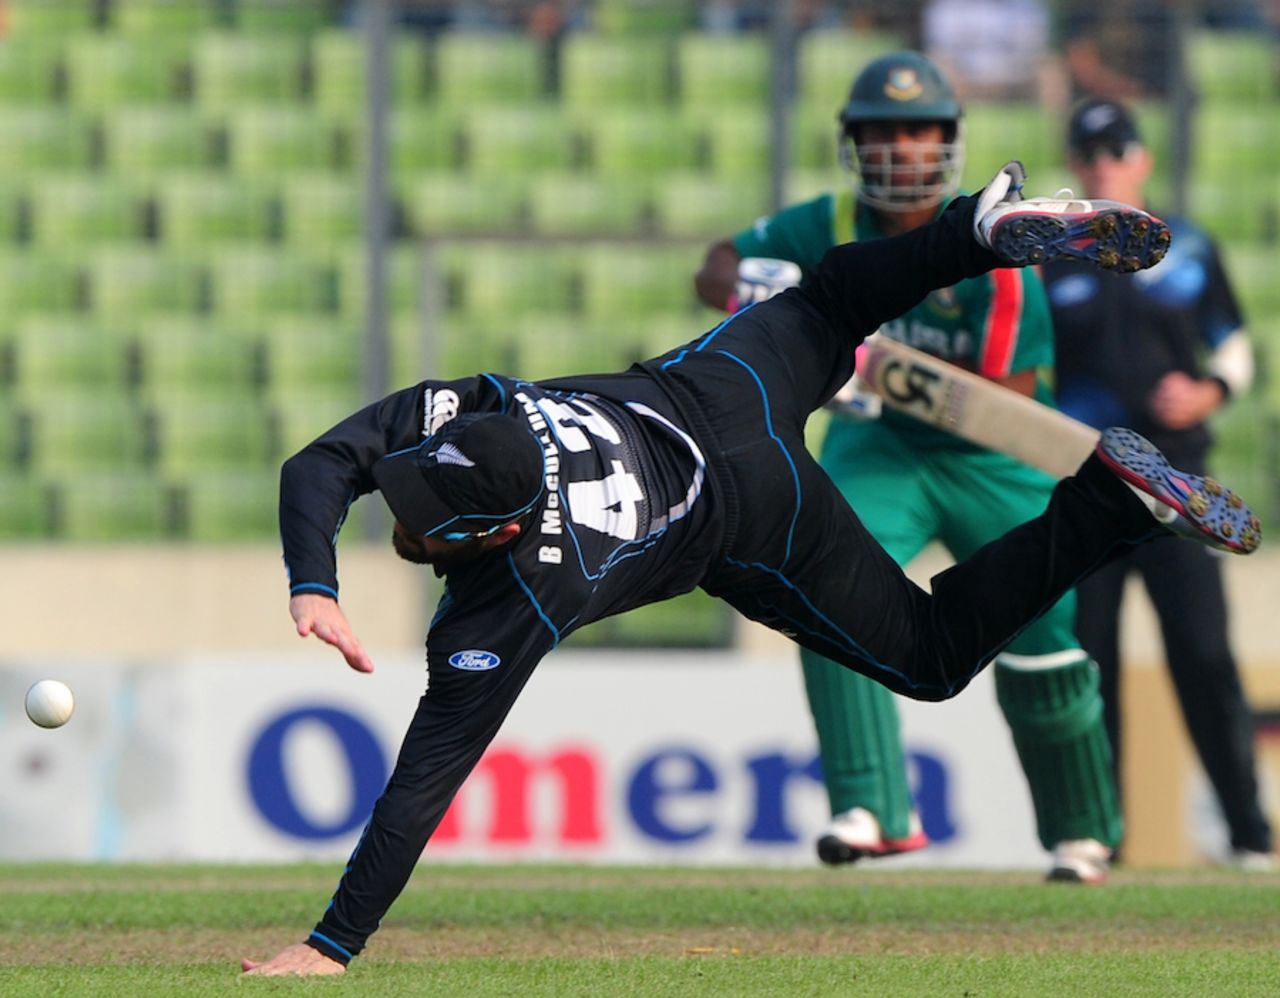 Brendon McCullum dives in vain to stop a Tamim Iqbal drive, Bangladesh v New Zealand, 2nd ODI, Mirpur, October 31, 2013